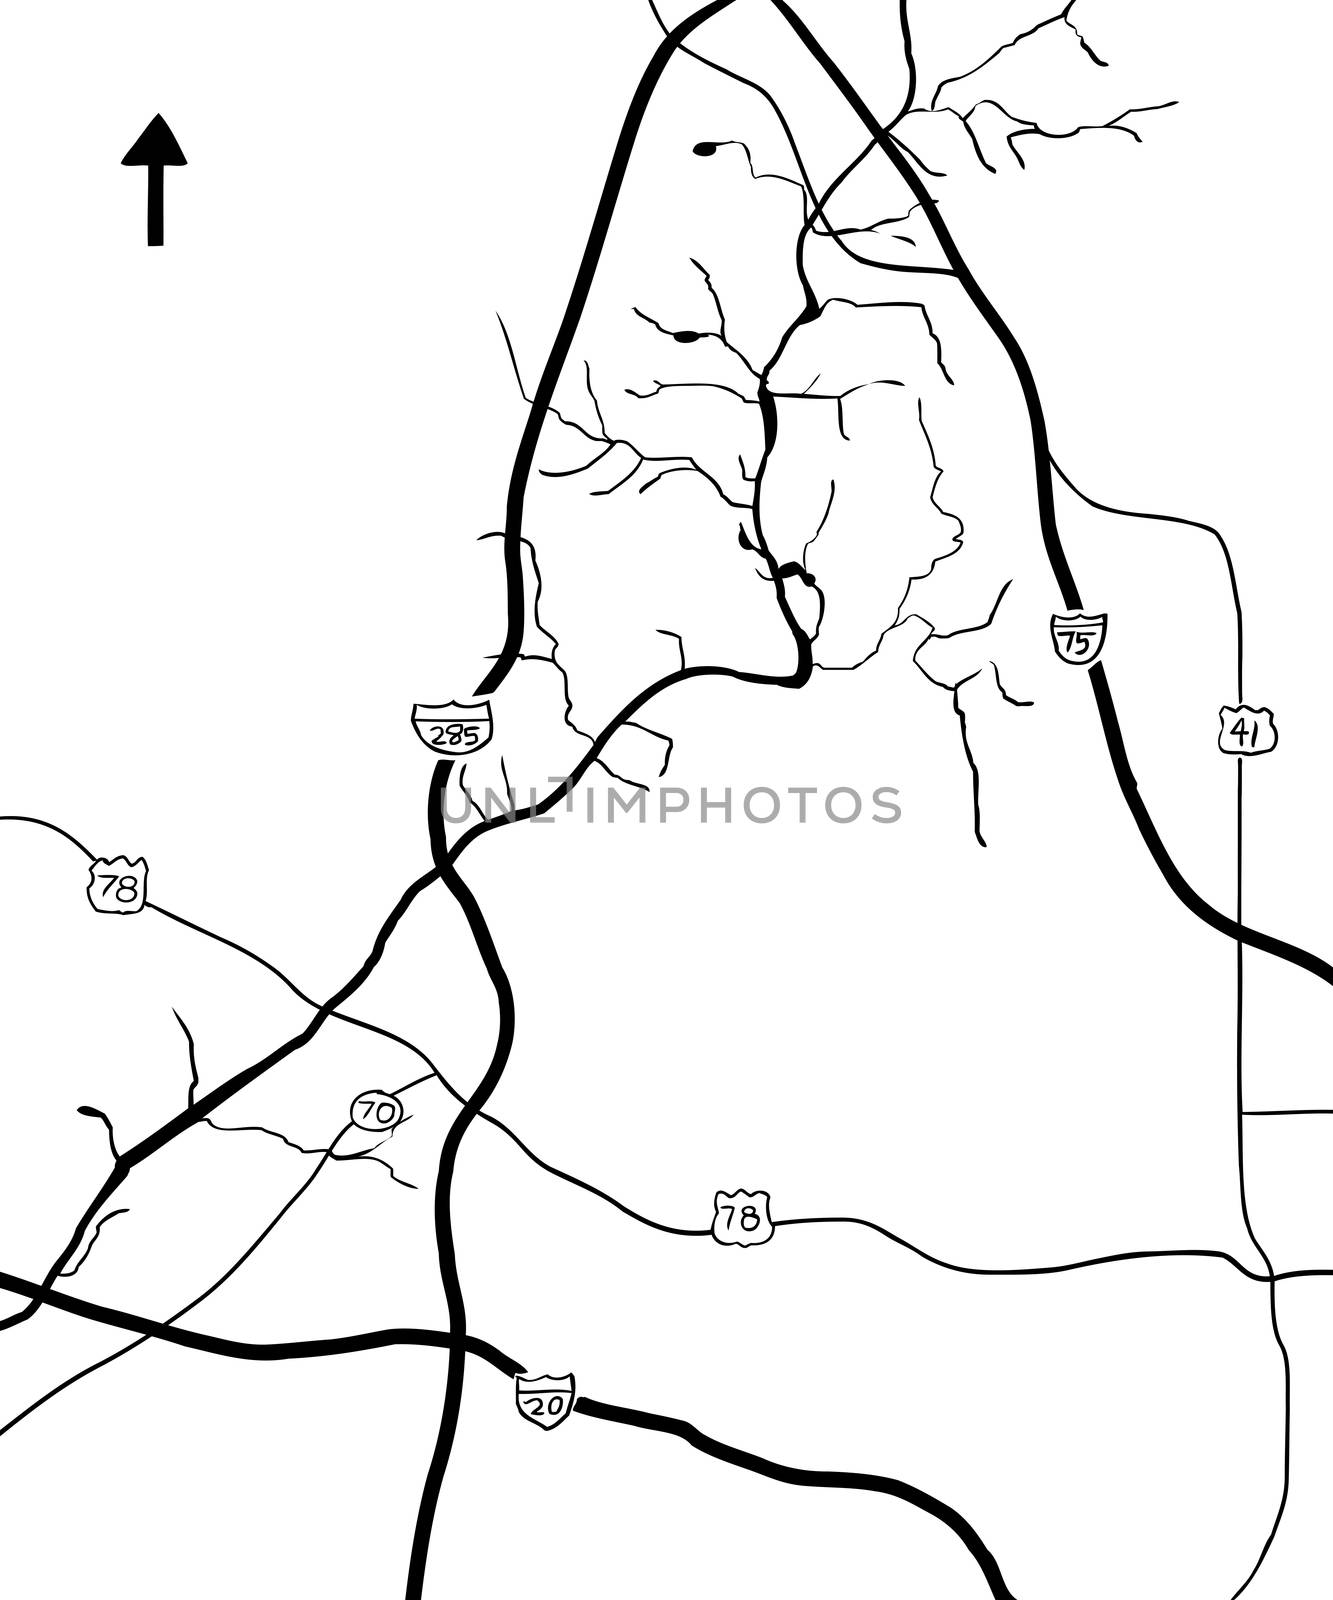 Outline map of Chattahoochee River and various highways by TheBlackRhino